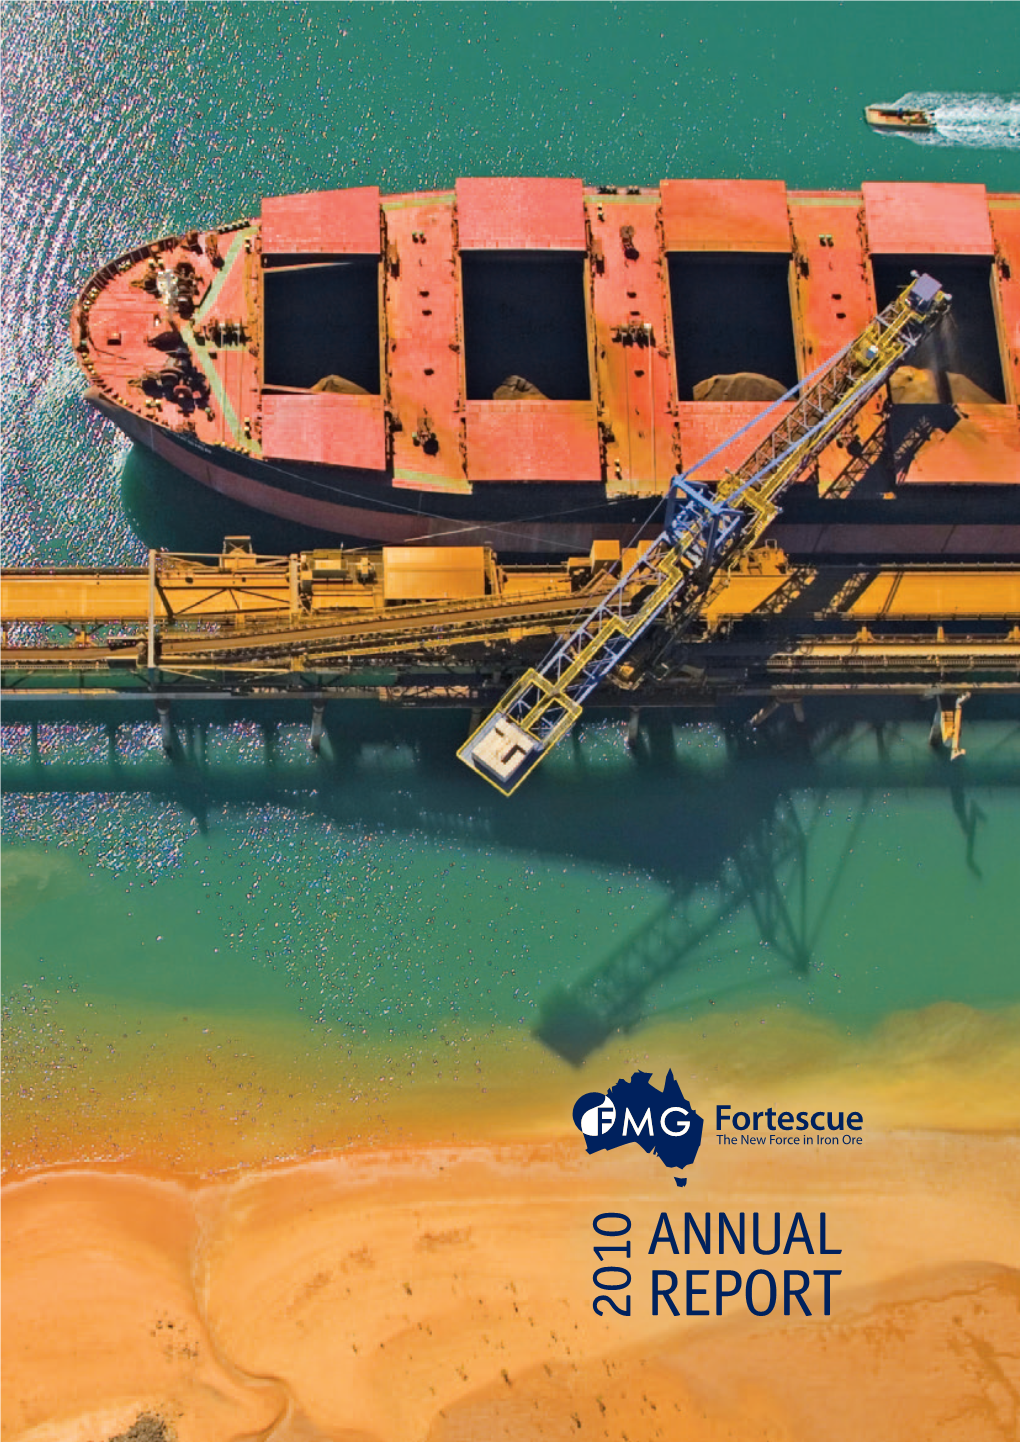 Fortescue Metals Group Annu Al Report 2010